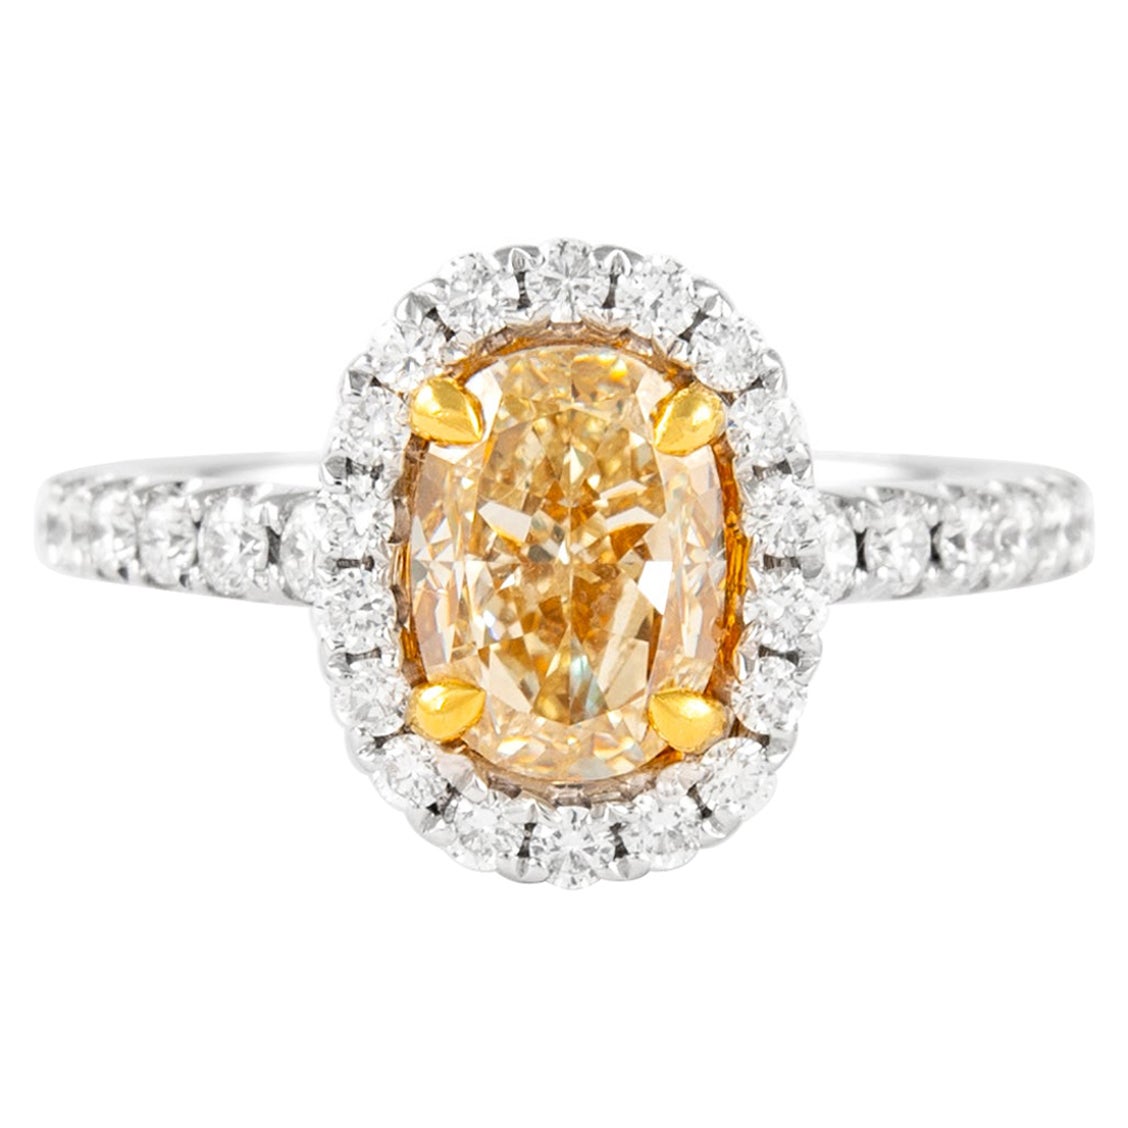 Alexander 2.66ctt Fancy Yellow Oval Diamond with Halo Ring 18k Two Tone